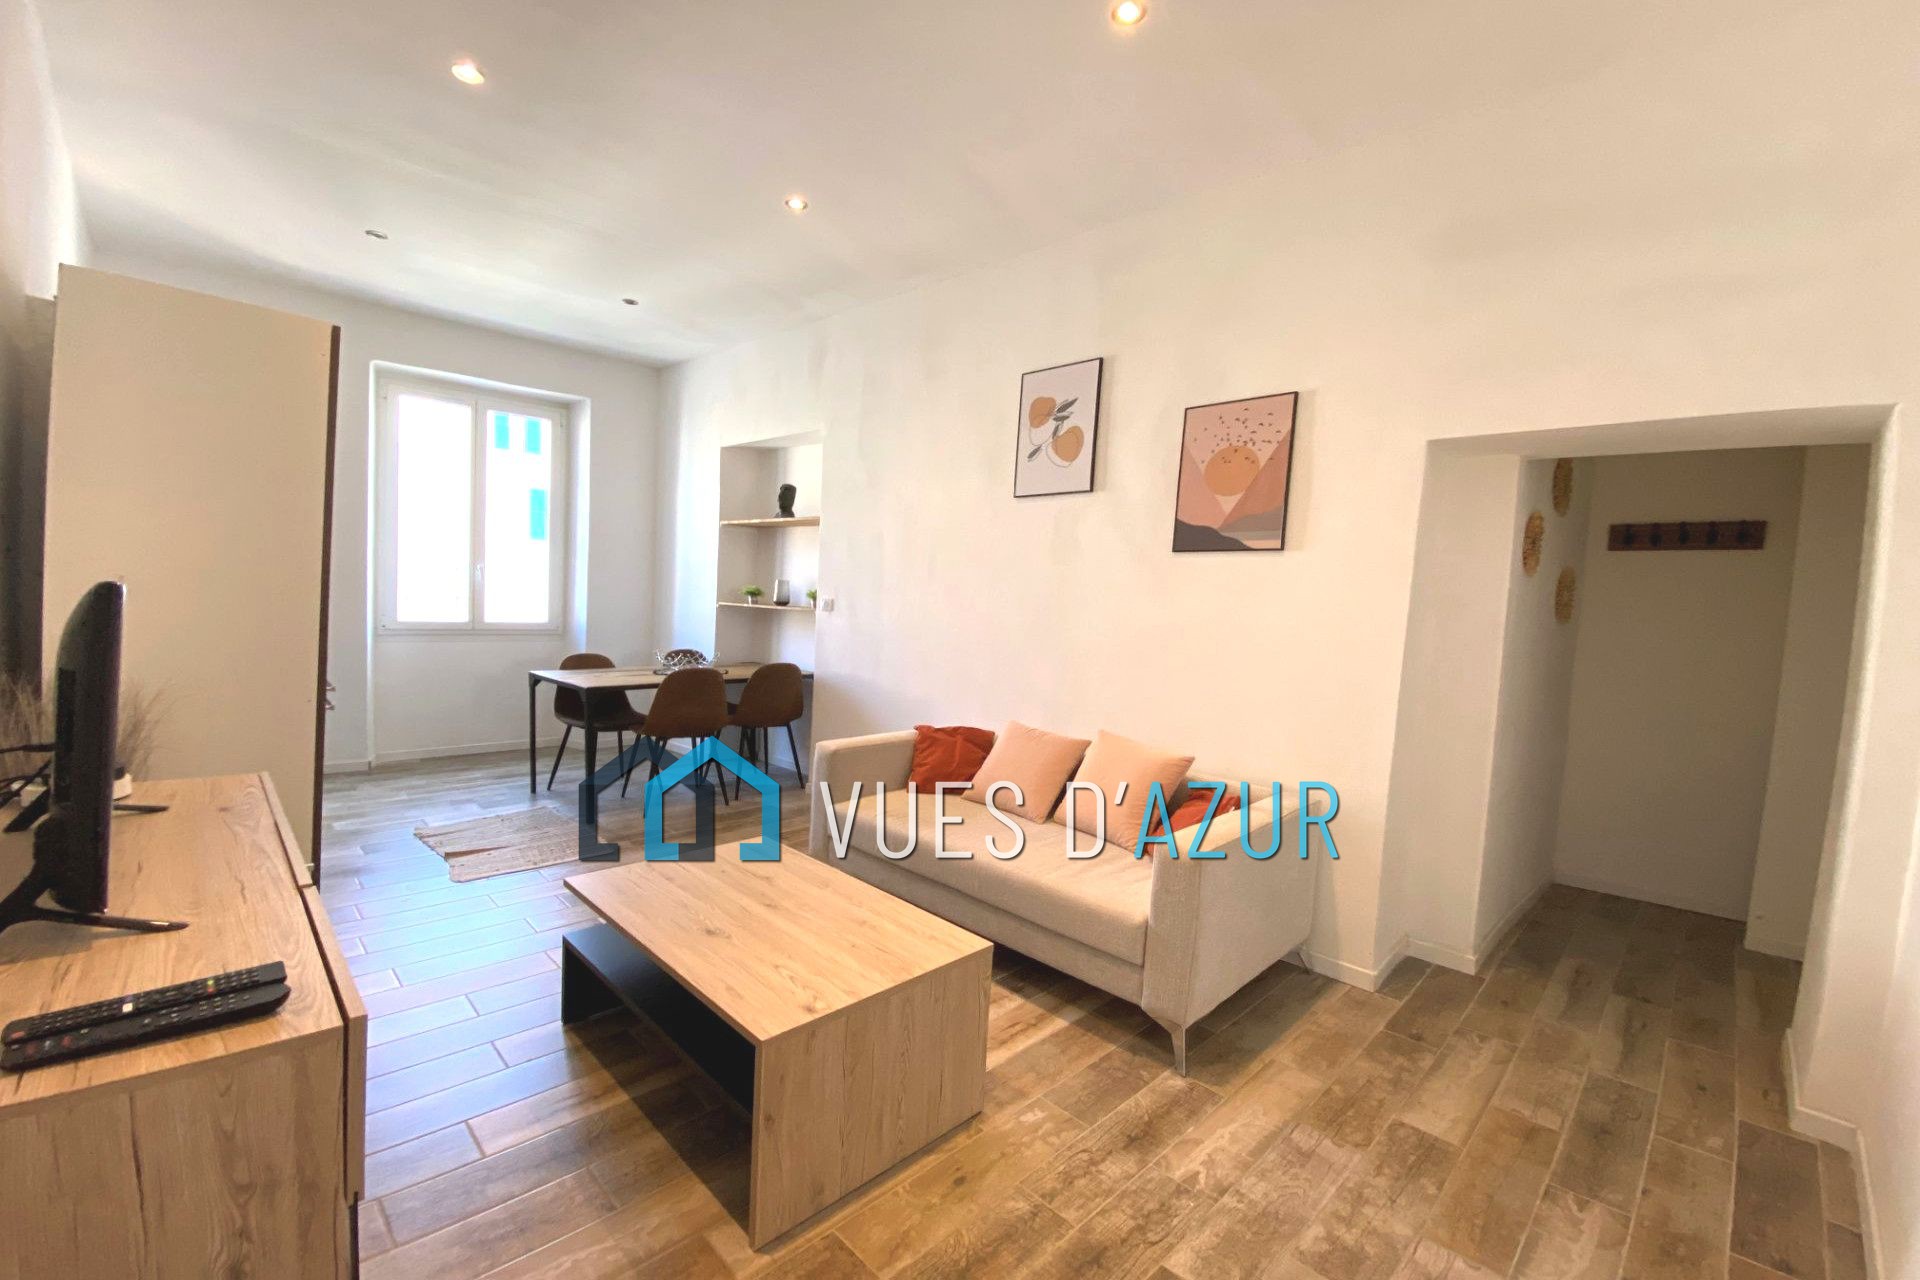 Appartement 2 pièces - 50m² - ANTIBES